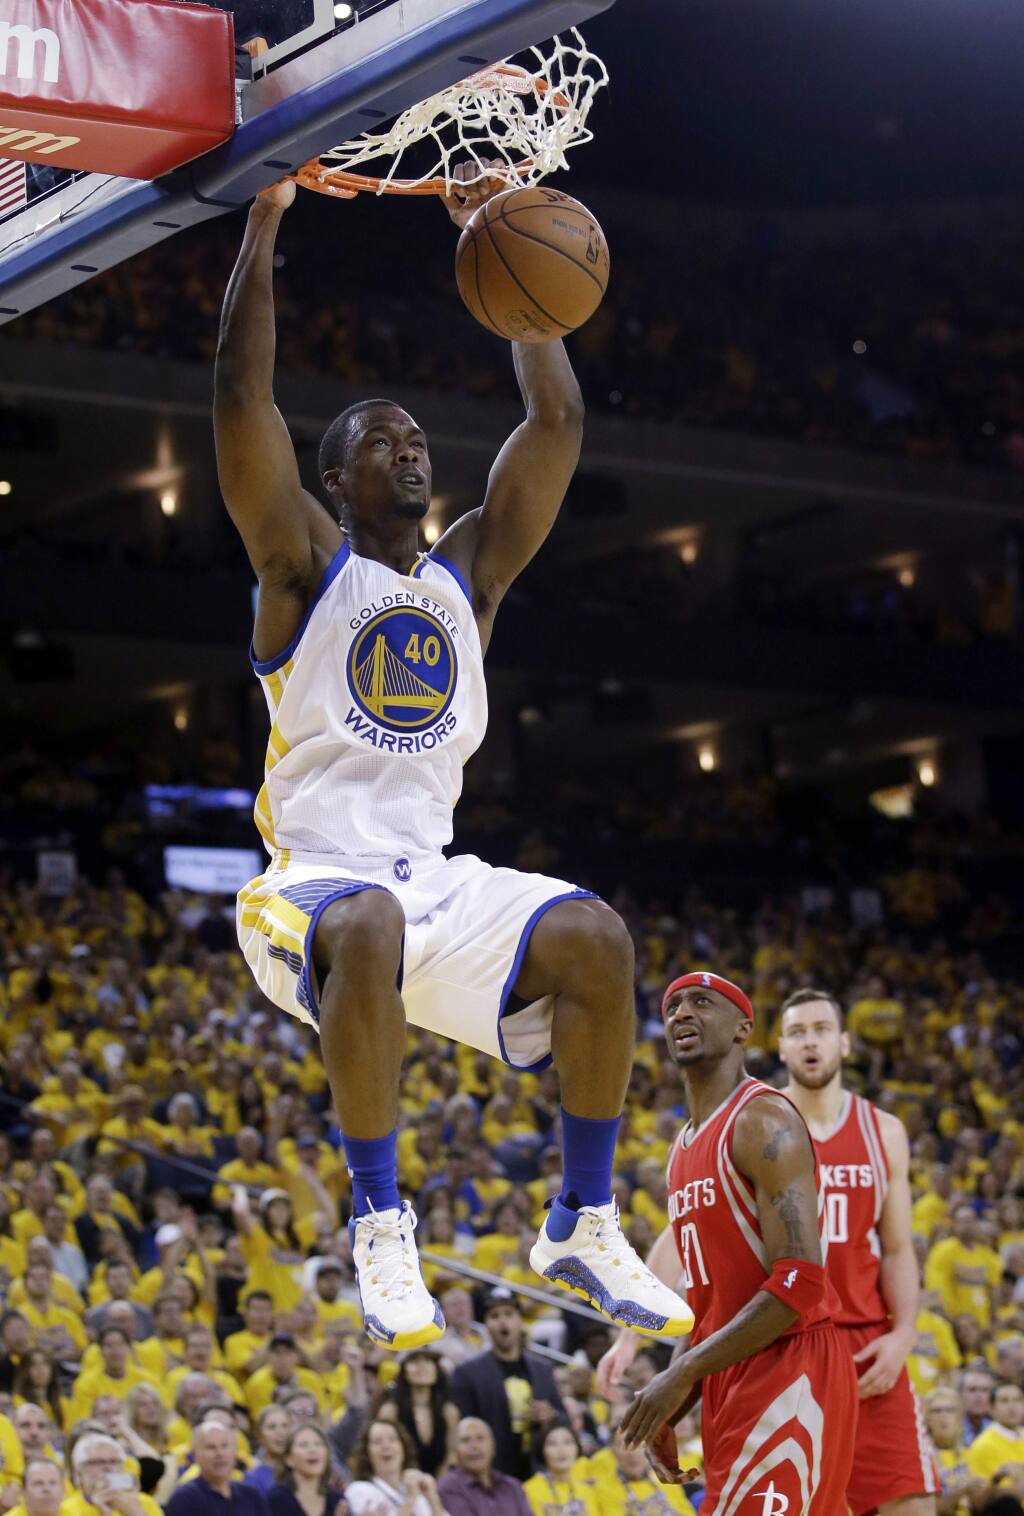 Harrison Barnes injury: Warriors rookie leaves after scary fall